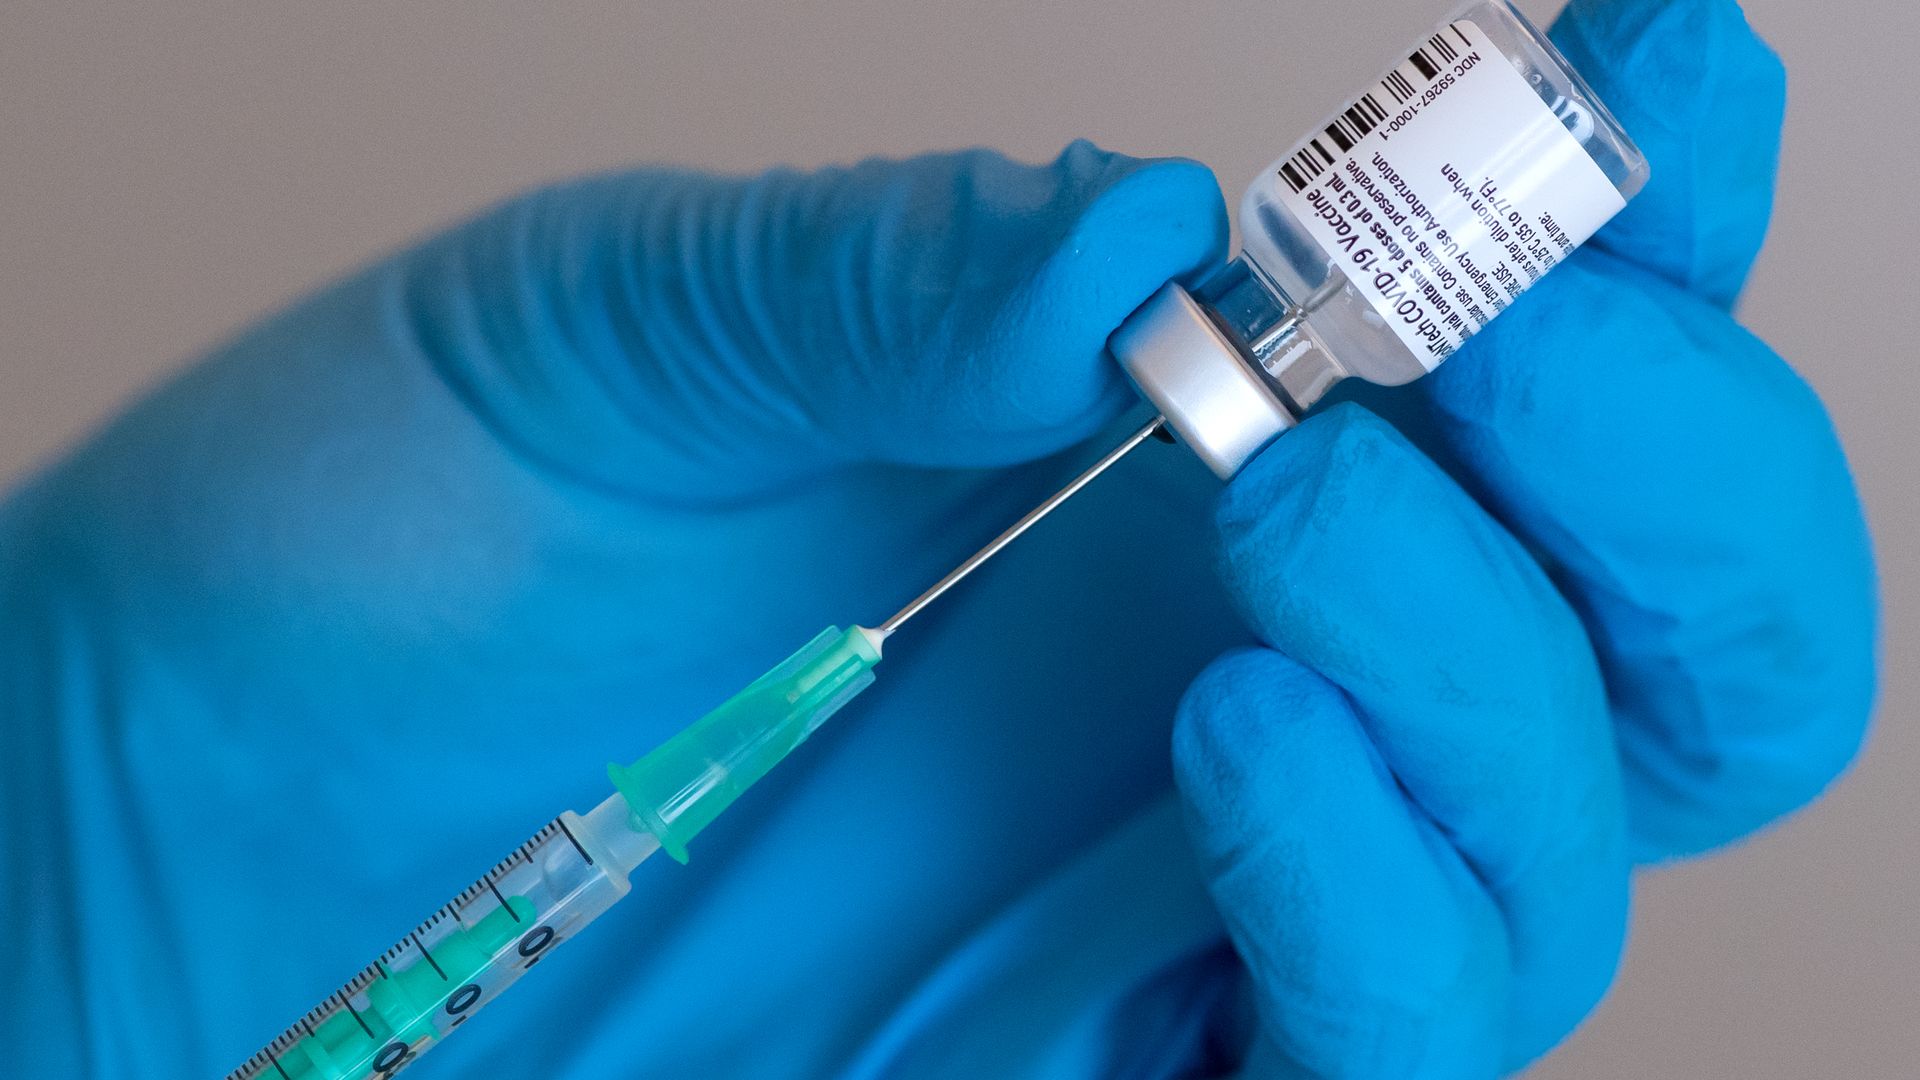 Pizer vaccine vial with a syringe